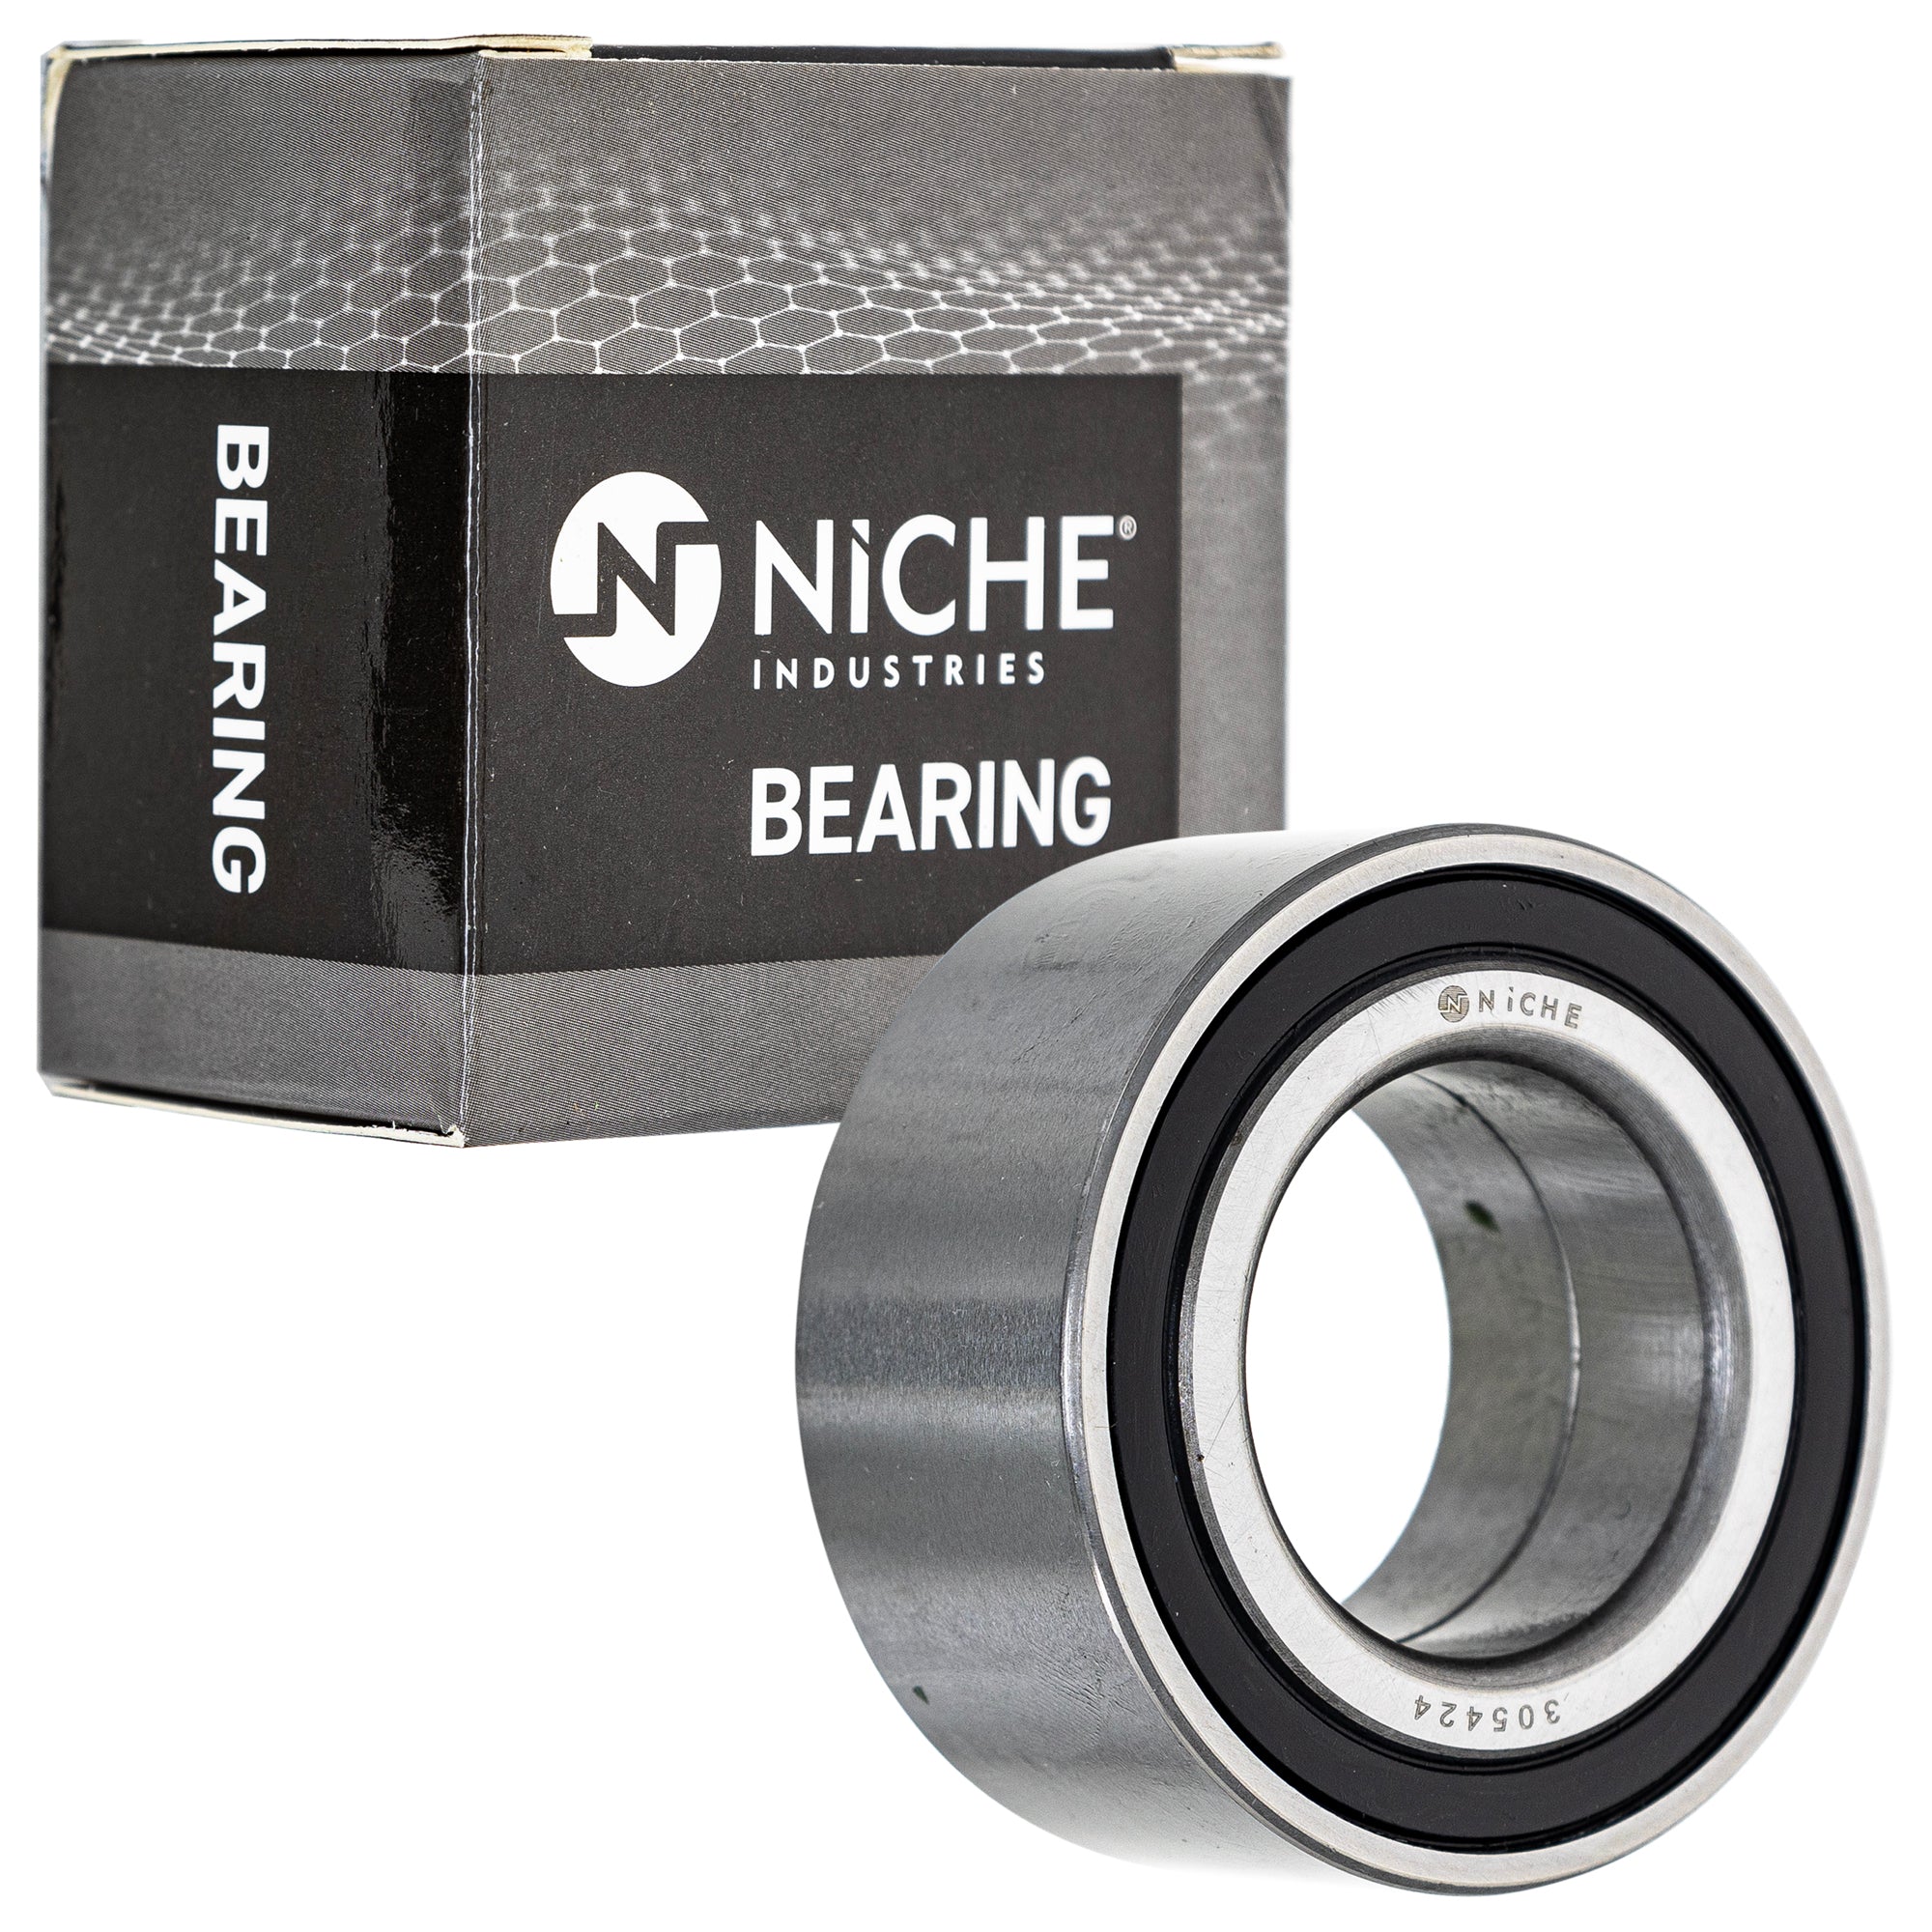 NICHE 519-CBB2255R Bearing 2-Pack for zOTHER BRP Can-Am Ski-Doo